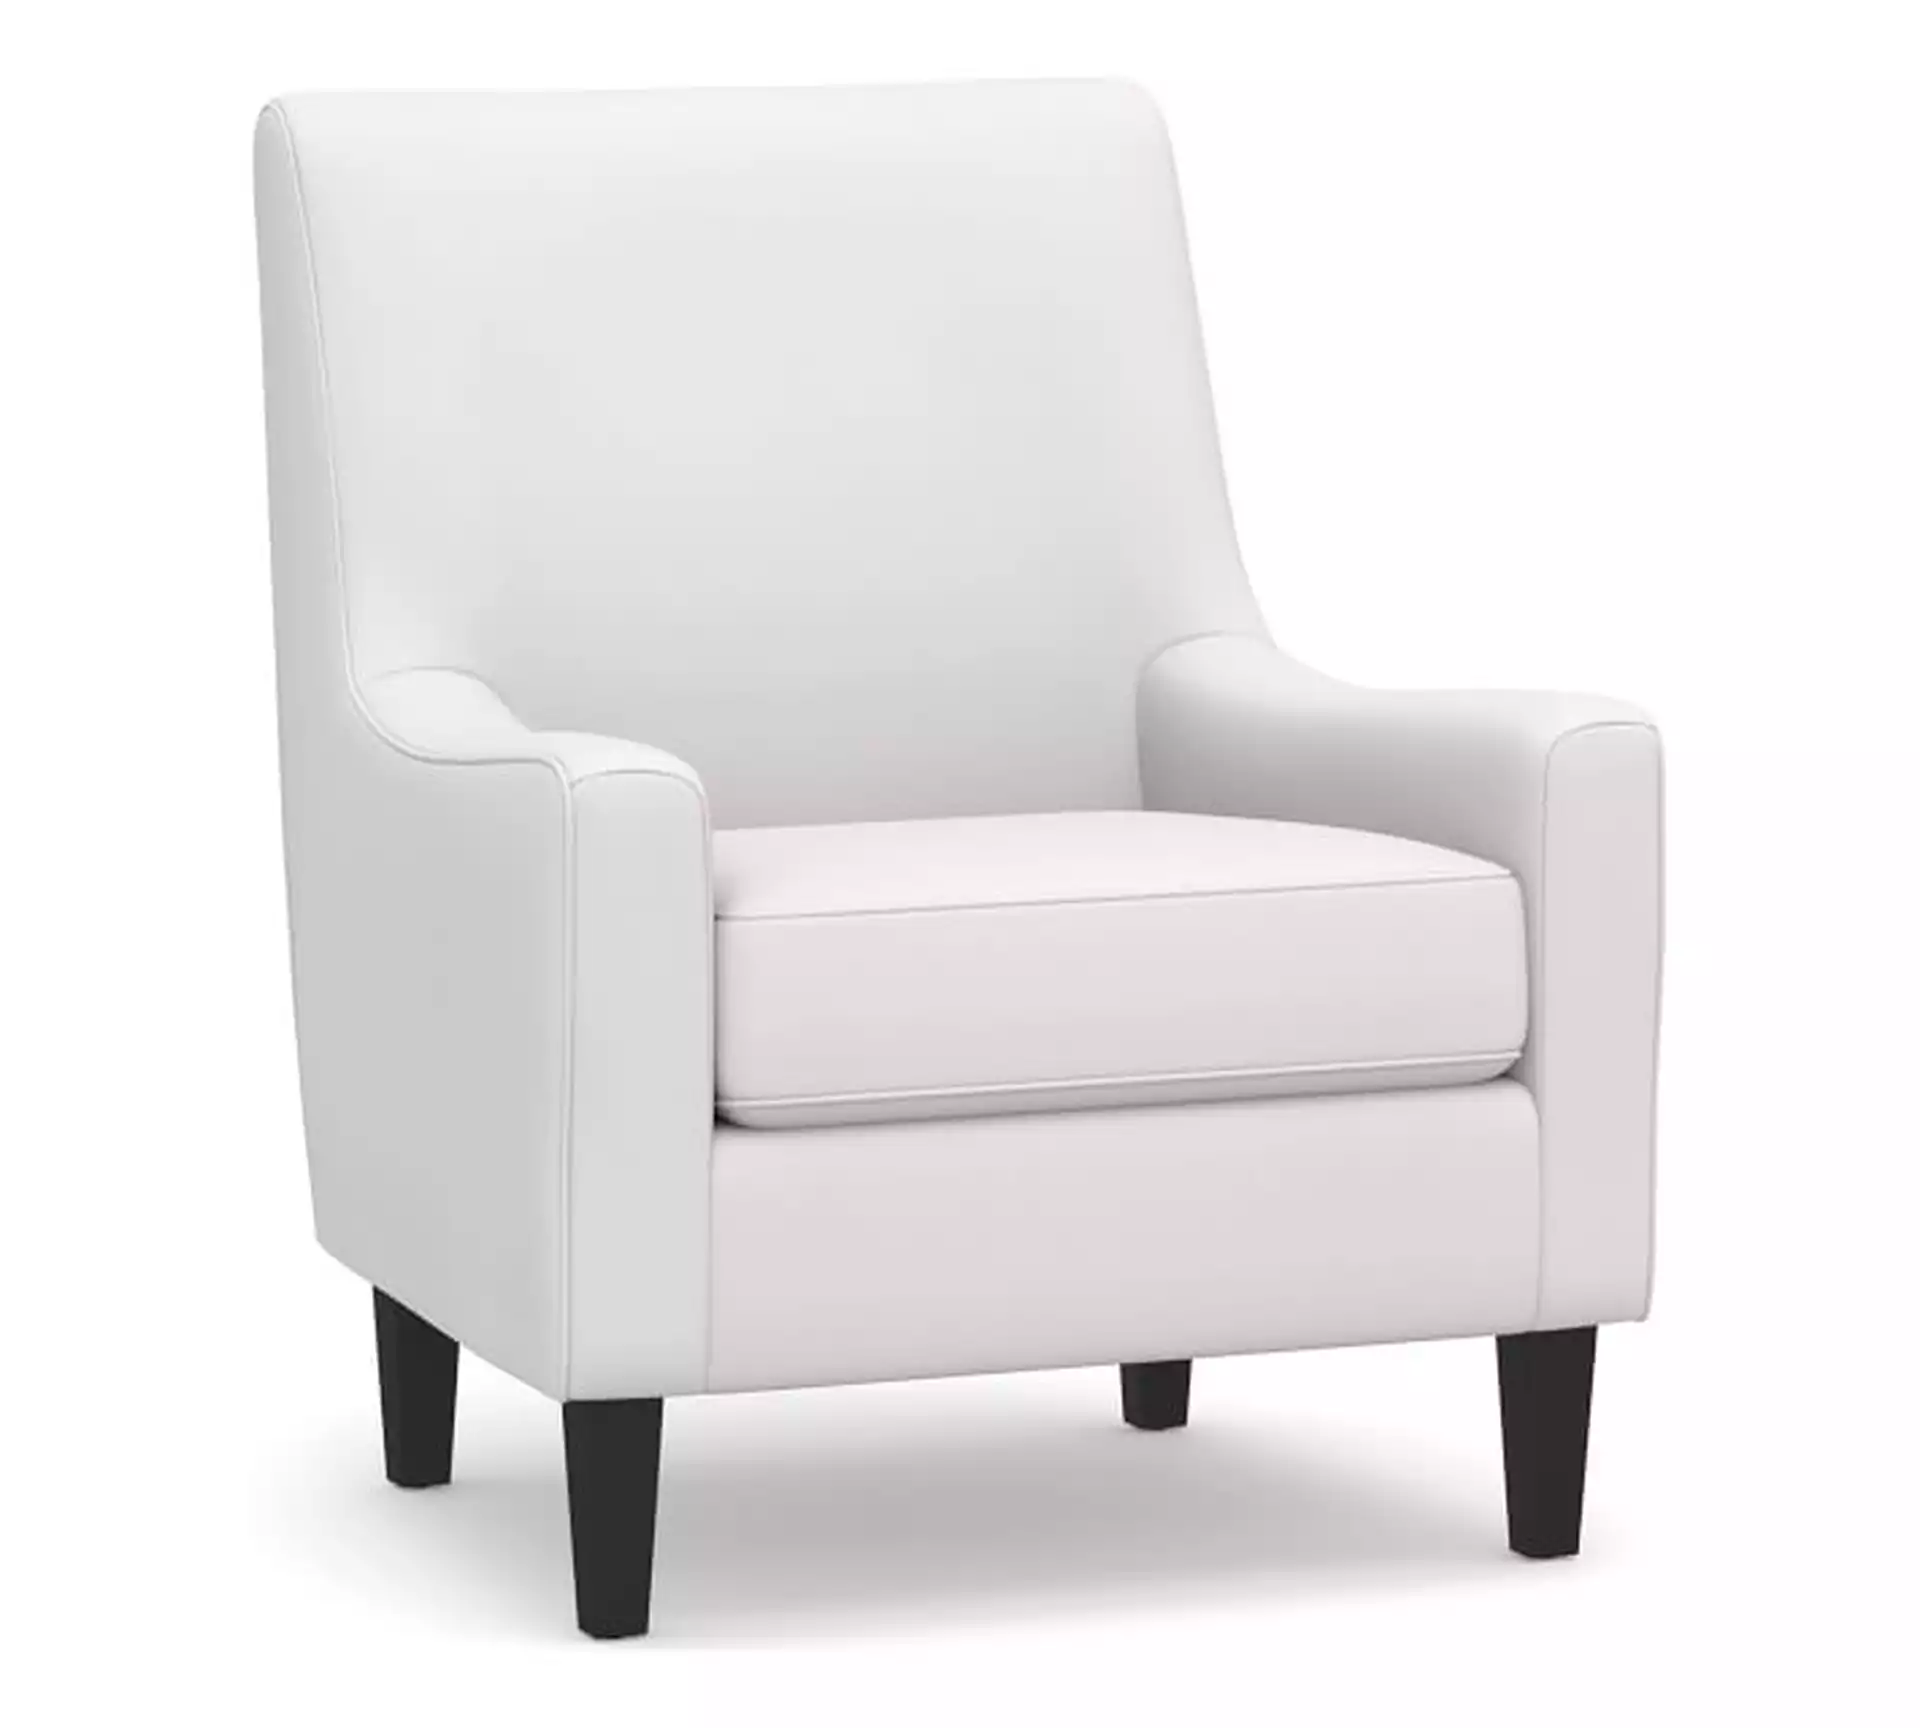 SoMa Isaac Upholstered Armchair, Polyester Wrapped Cushions, Twill White